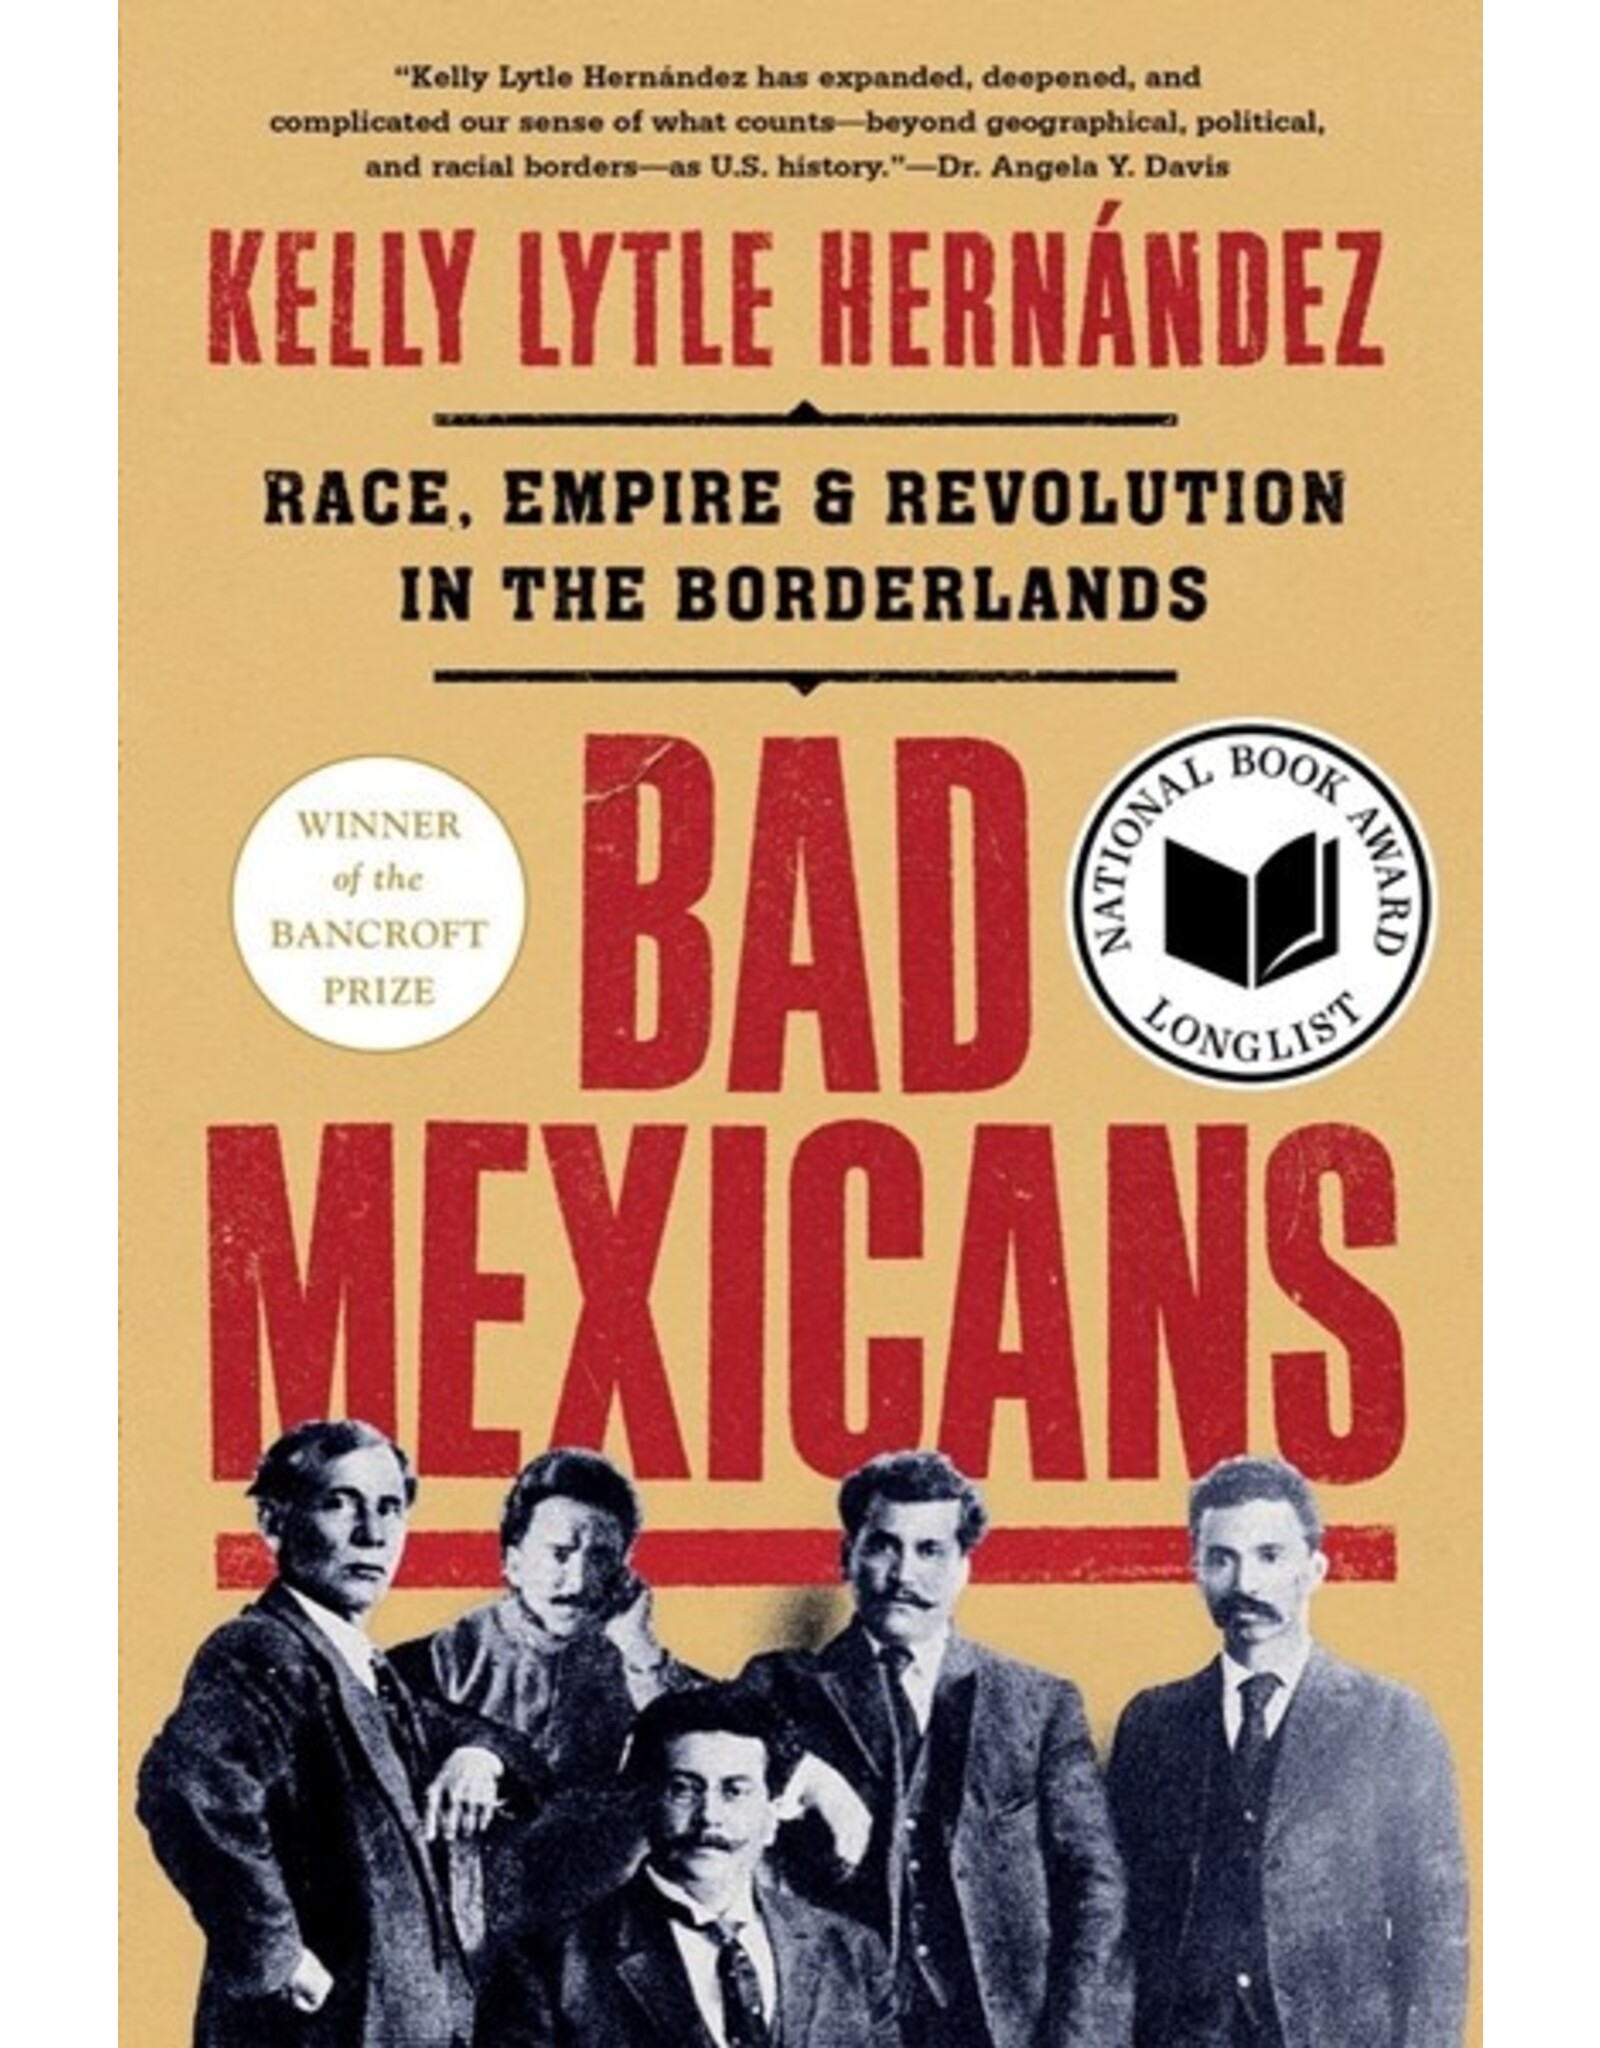 Books Bad Mexicans: Race , Empire & Revolution in the Borderlands by Kelly Lytle Hernandez